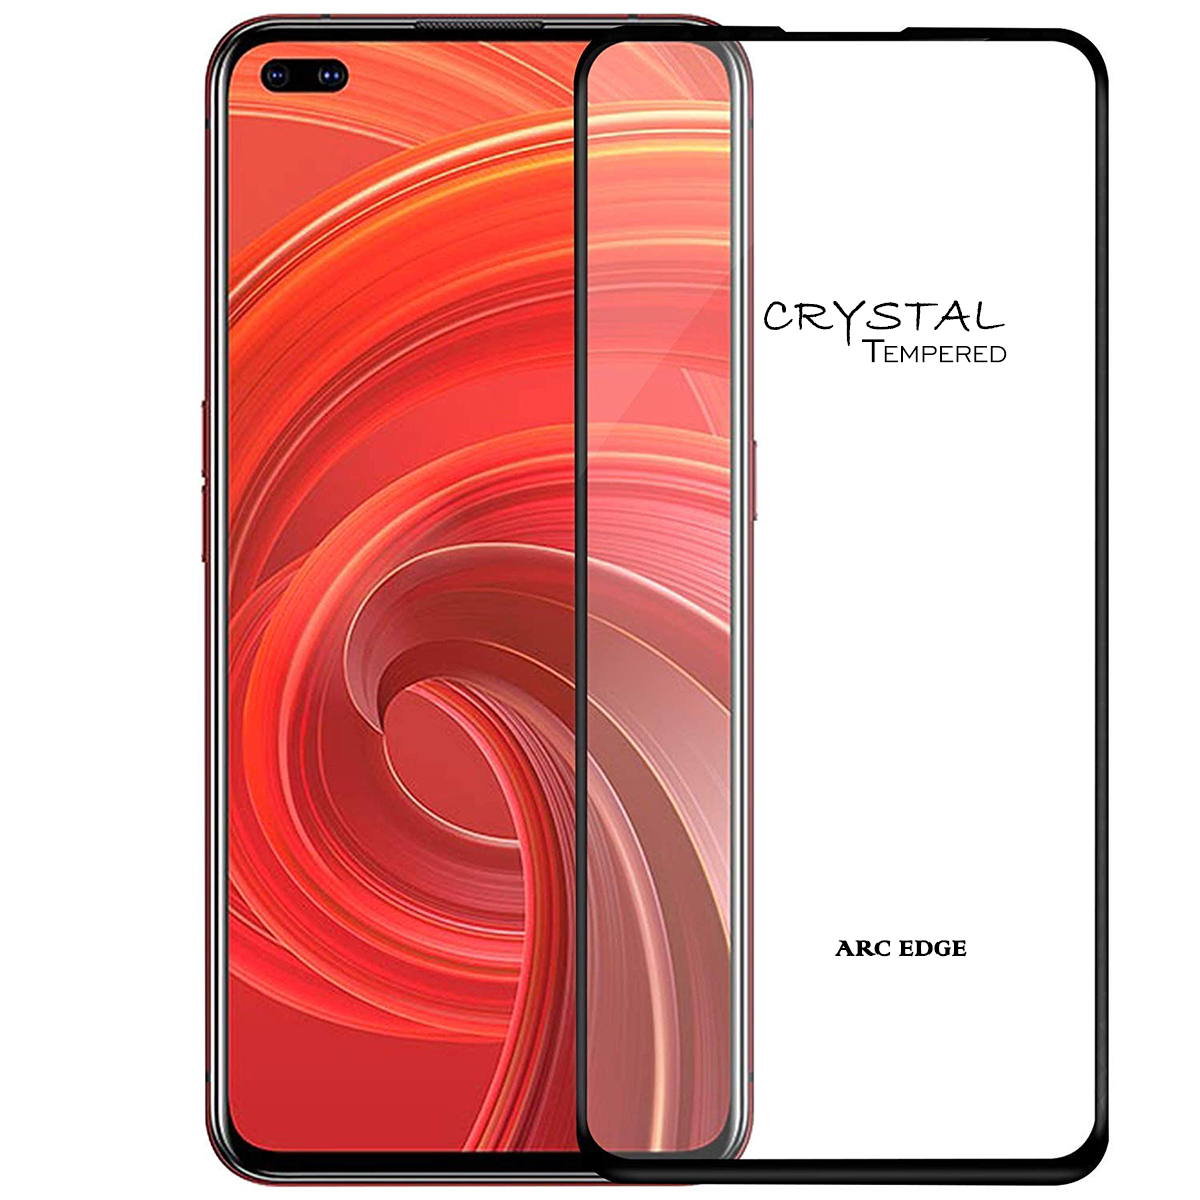 iFix Crystal 5D Tempered Glass for OPPO REALME X50 PRO/RENO 3 PRO 4G